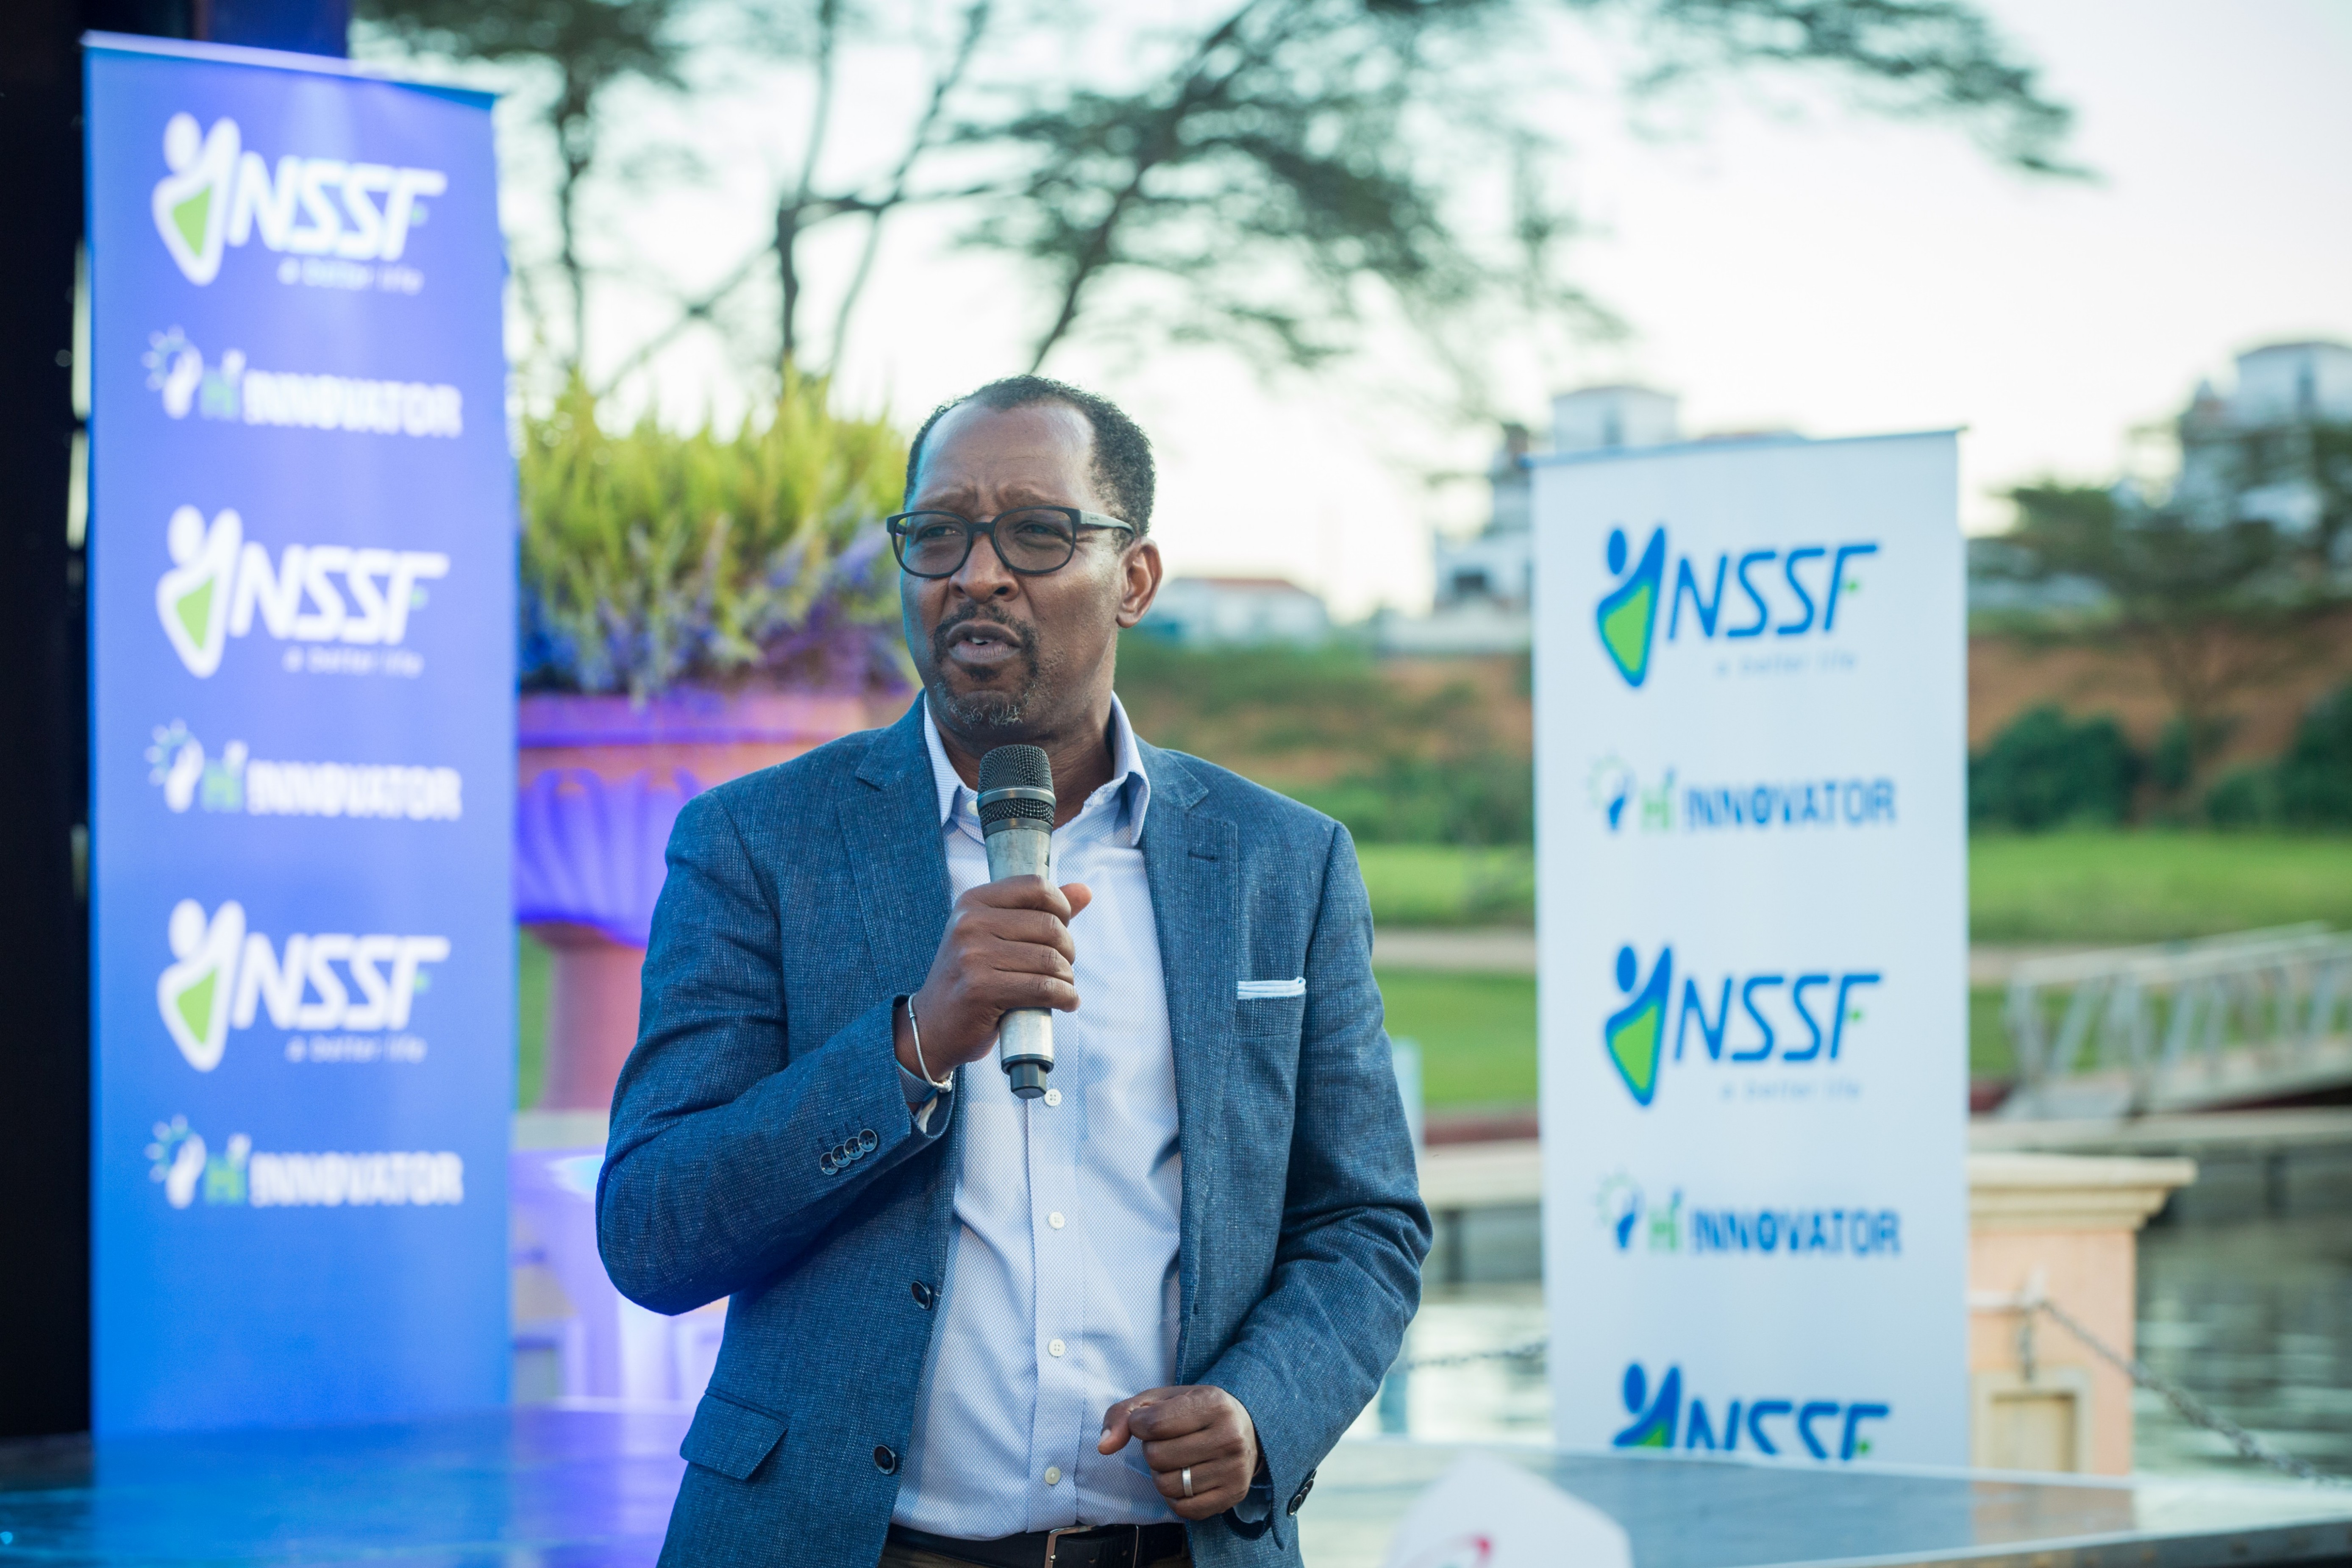 NSSF MD, Mr. Richard Patrick Byarugaba giving a speech during the launch of the initiative